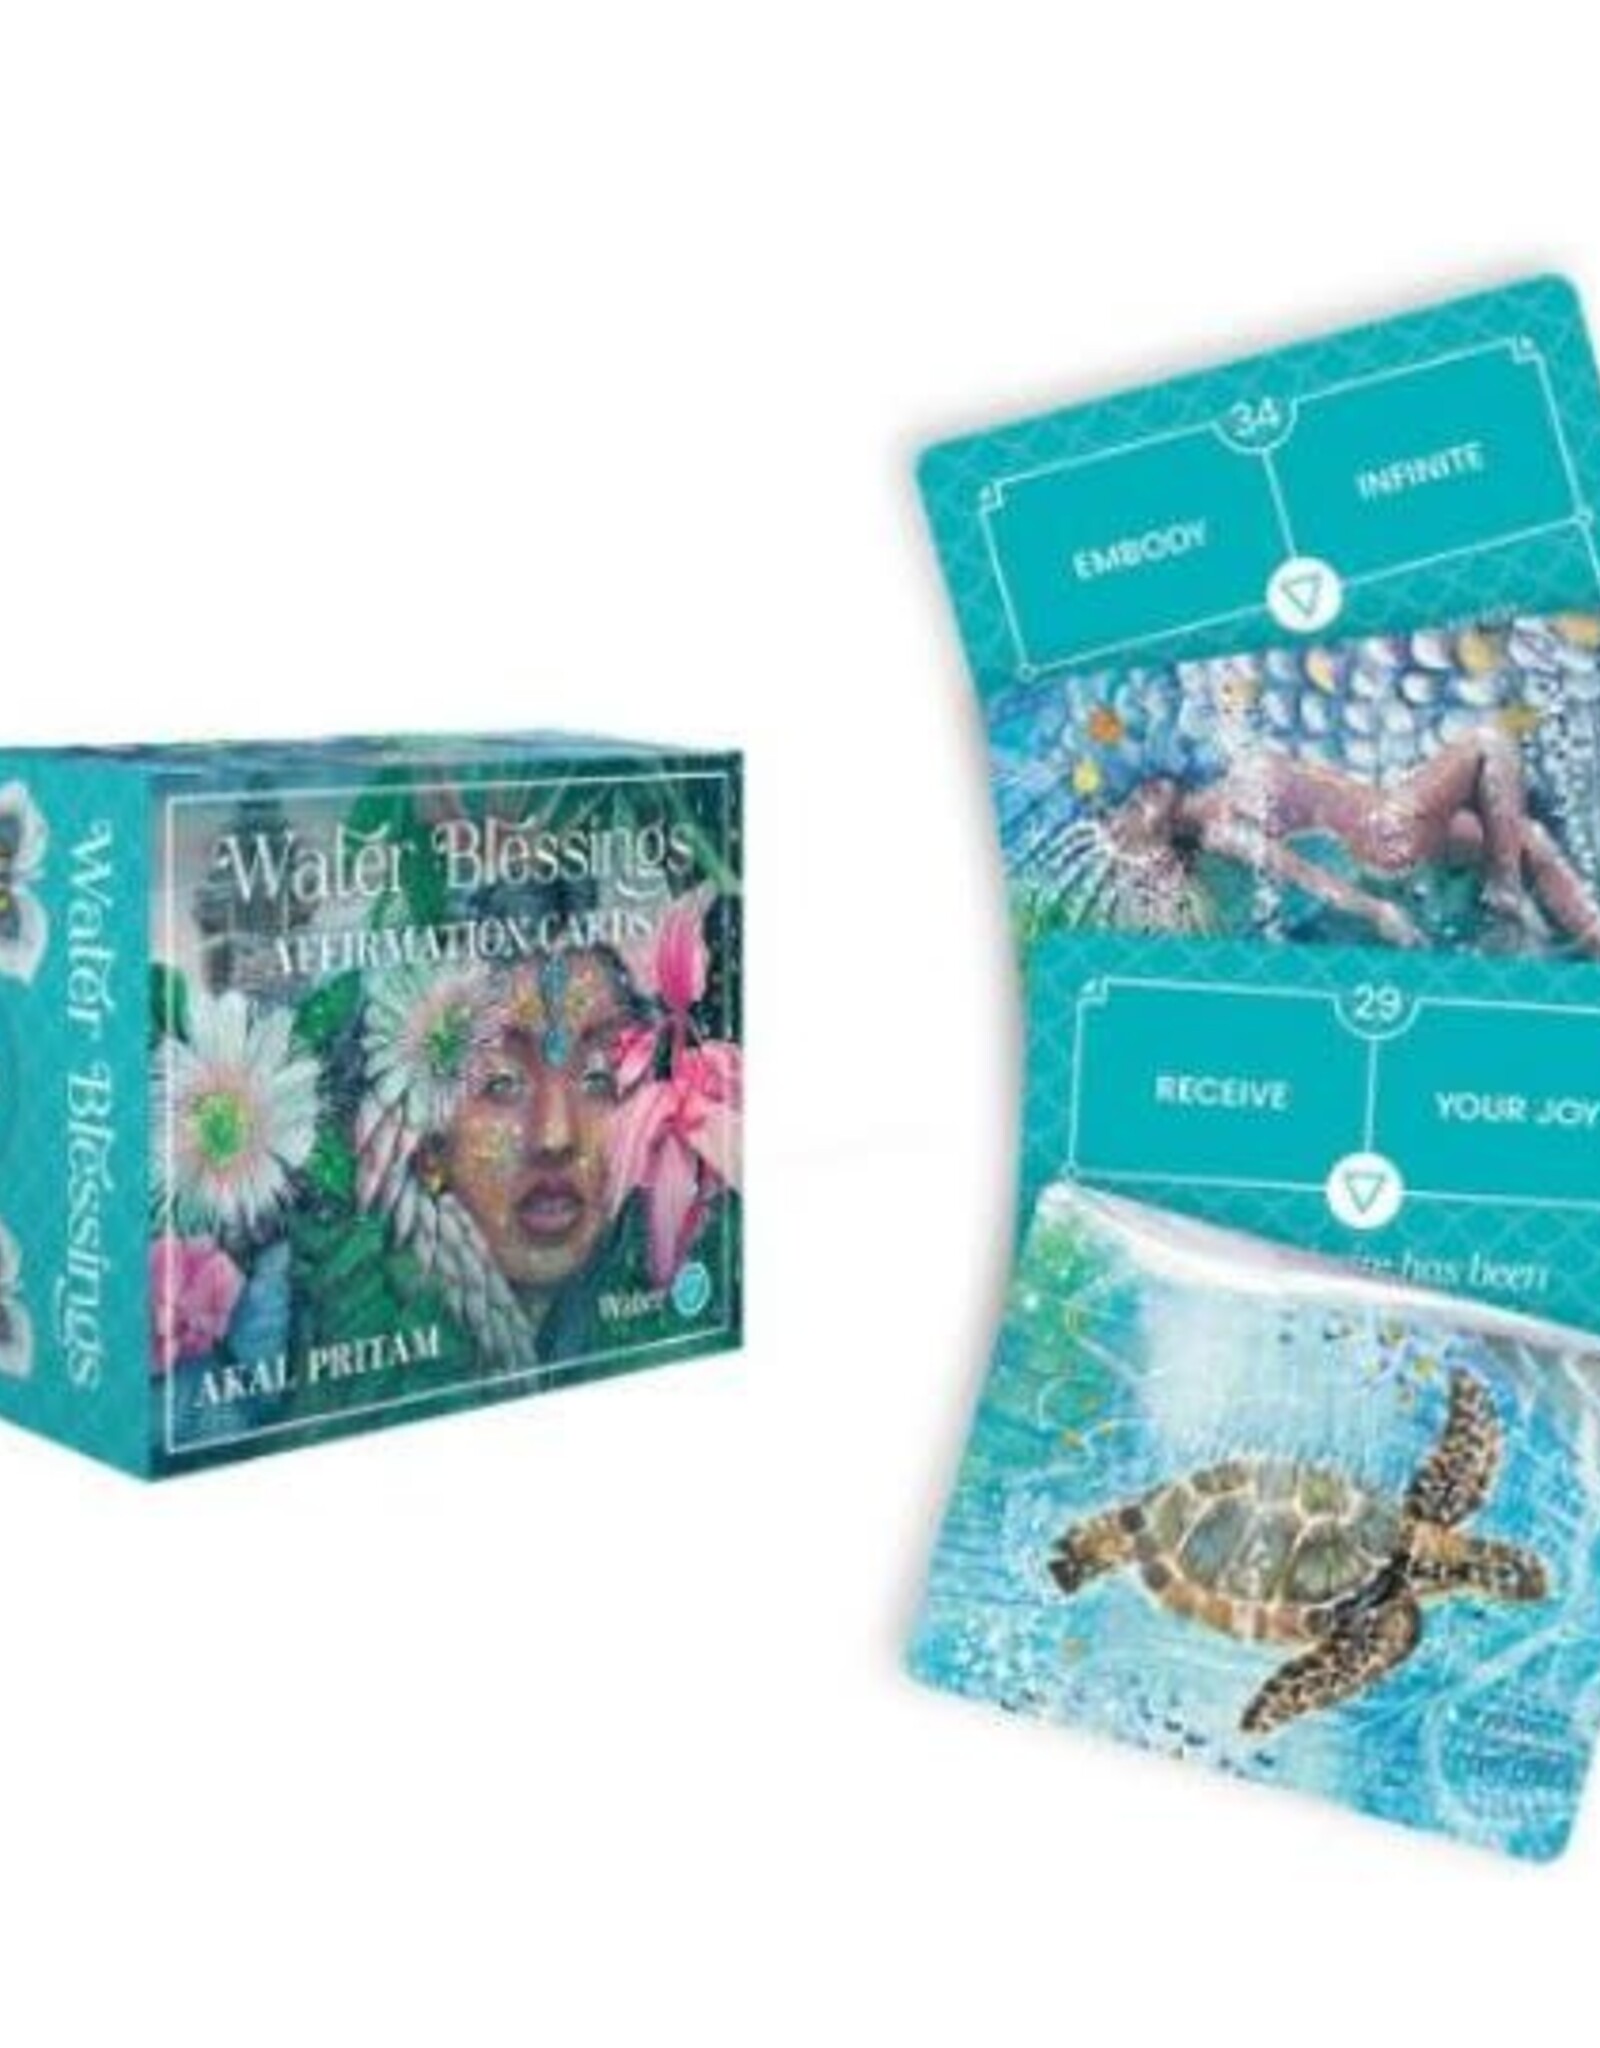 Water Blessings  Affirmation Cards by Akal Pritam